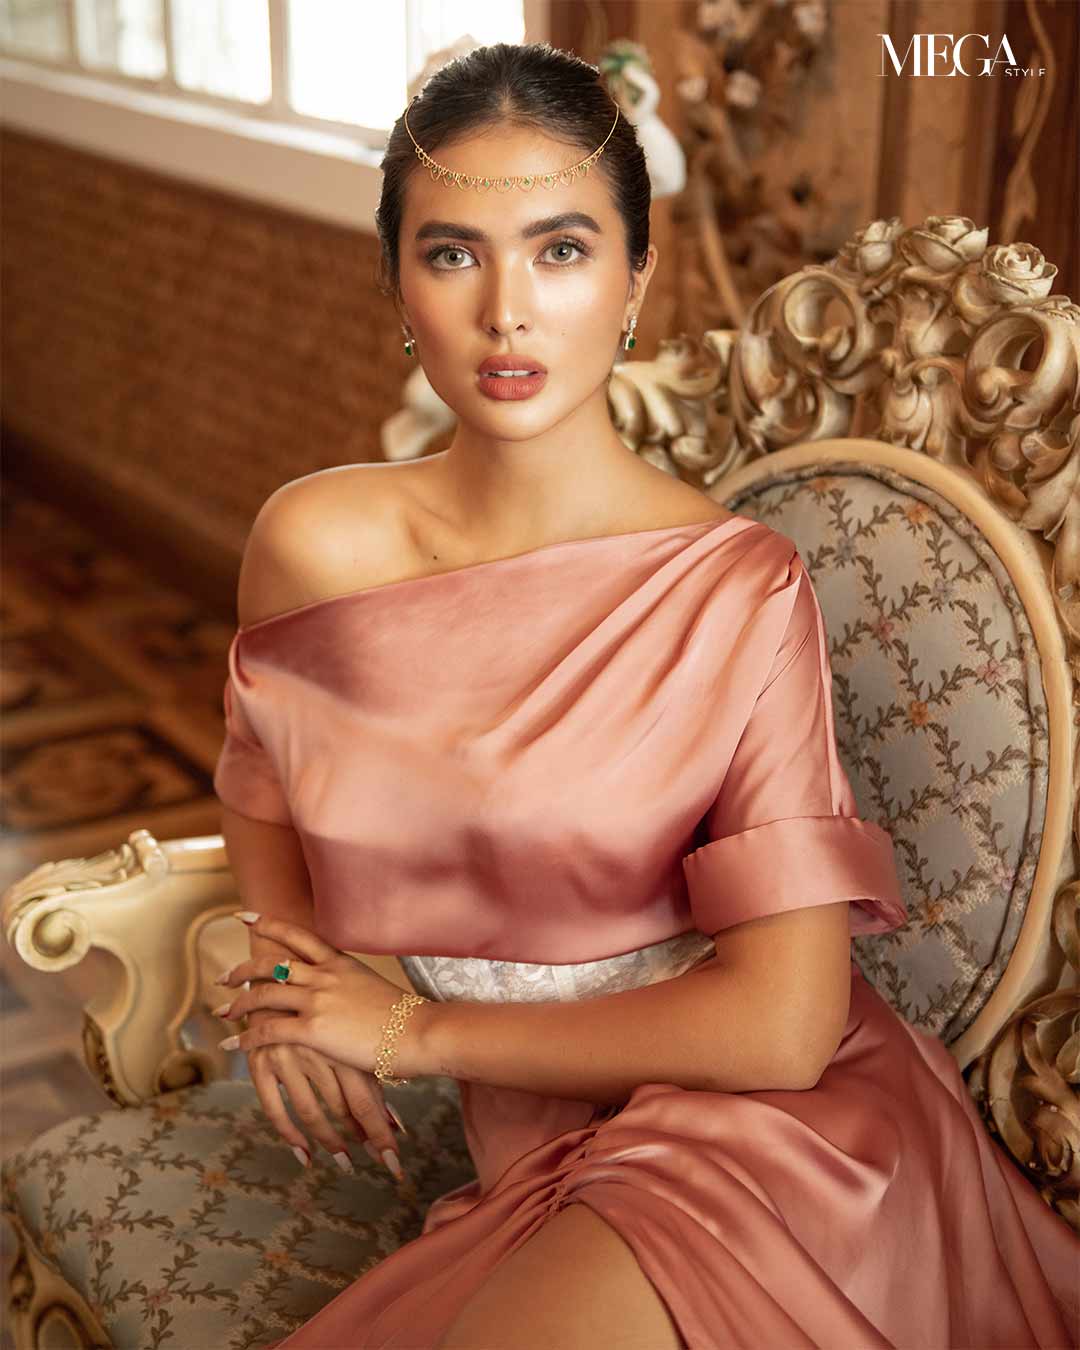 MEGAStyle December 2021 cover girl, Sofia Andres, shows us how to live life...